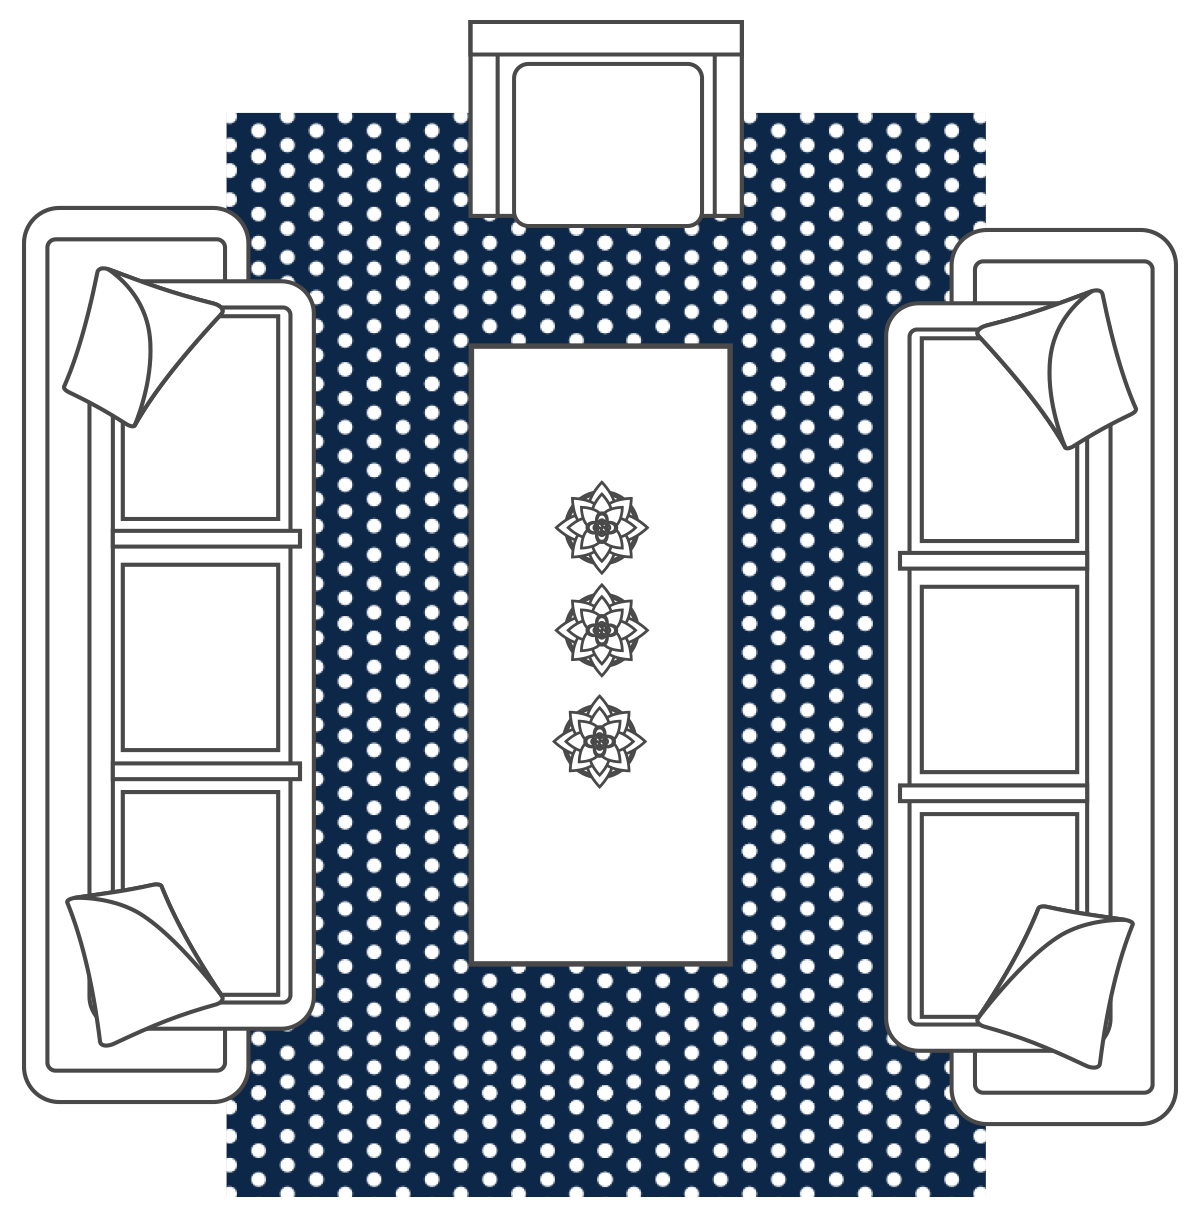 diagram of living room area rug layout under the front legs of furniture